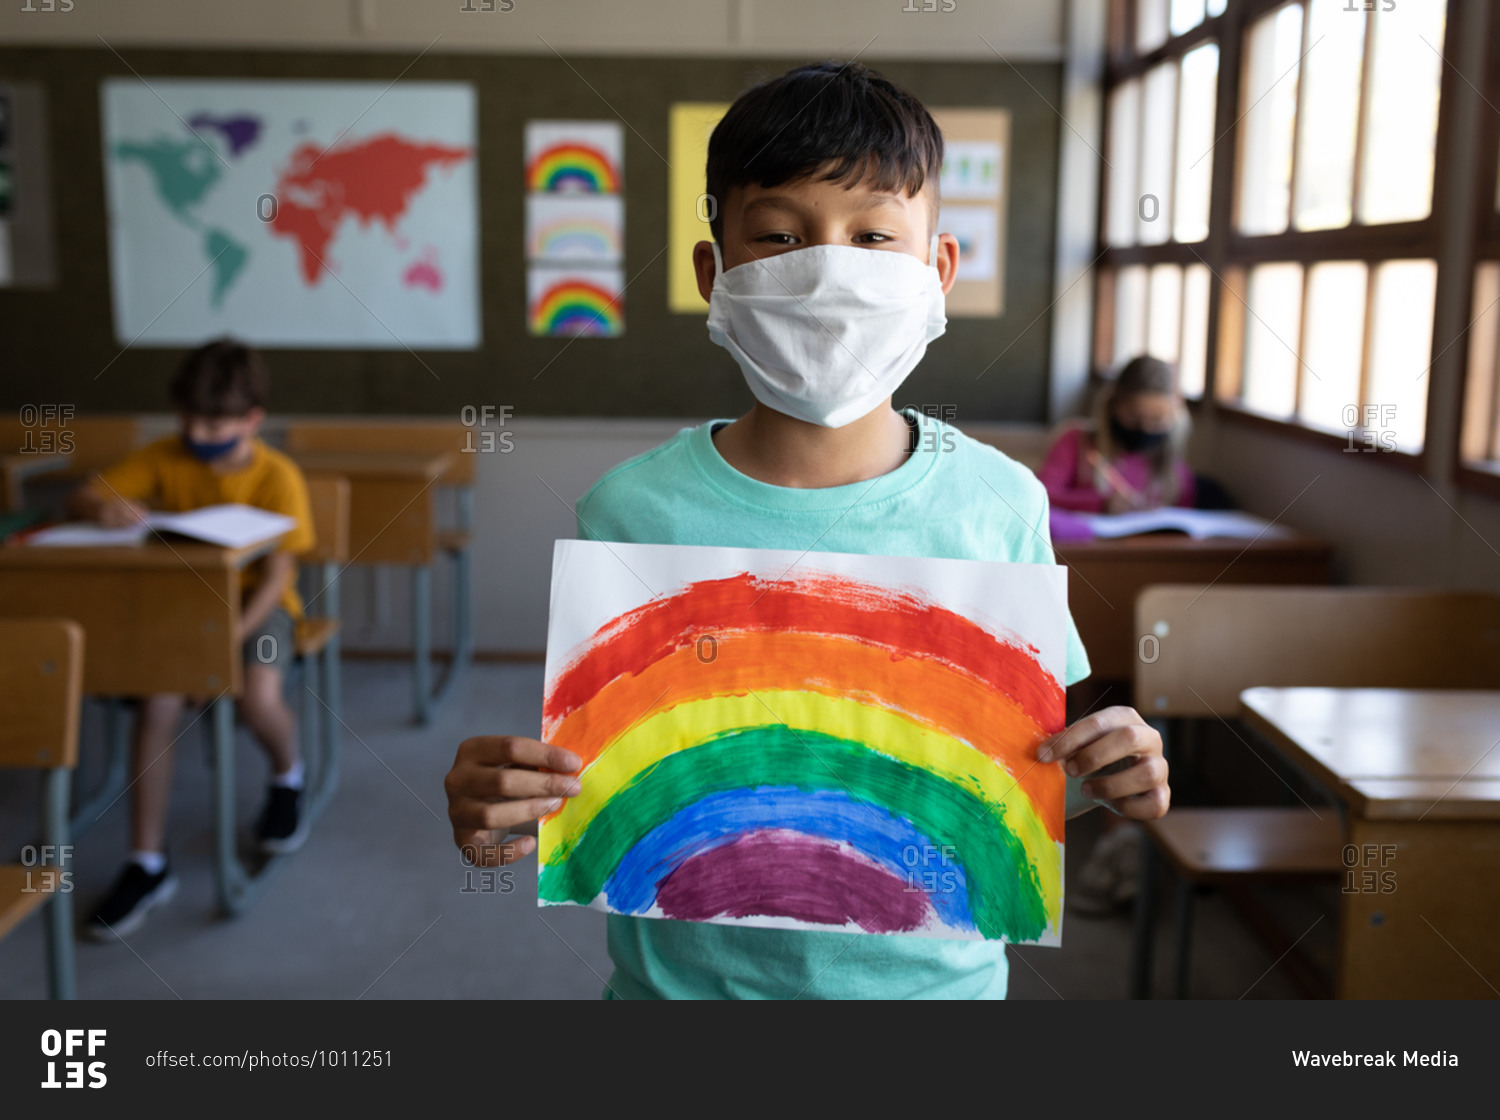 Portrait of a mixed race boy wearing face mask holding a rainbow drawing in the classroom. Primary education social distancing health safety during Covid19 Coronavirus pandemic.